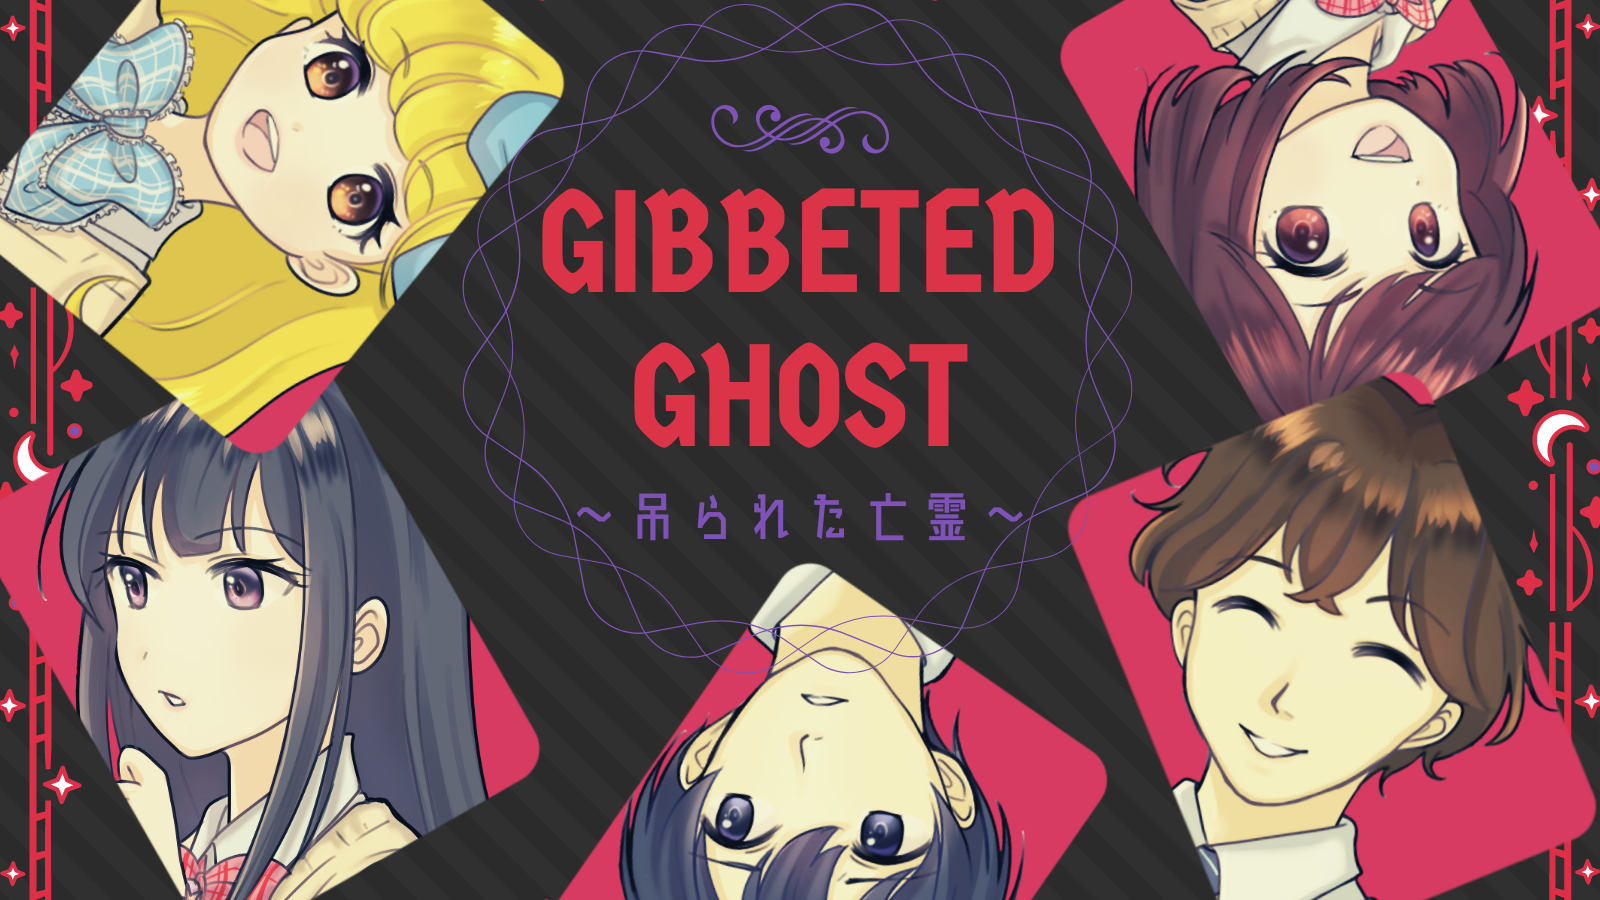 Gibbeted Ghost 〜吊られた亡霊〜